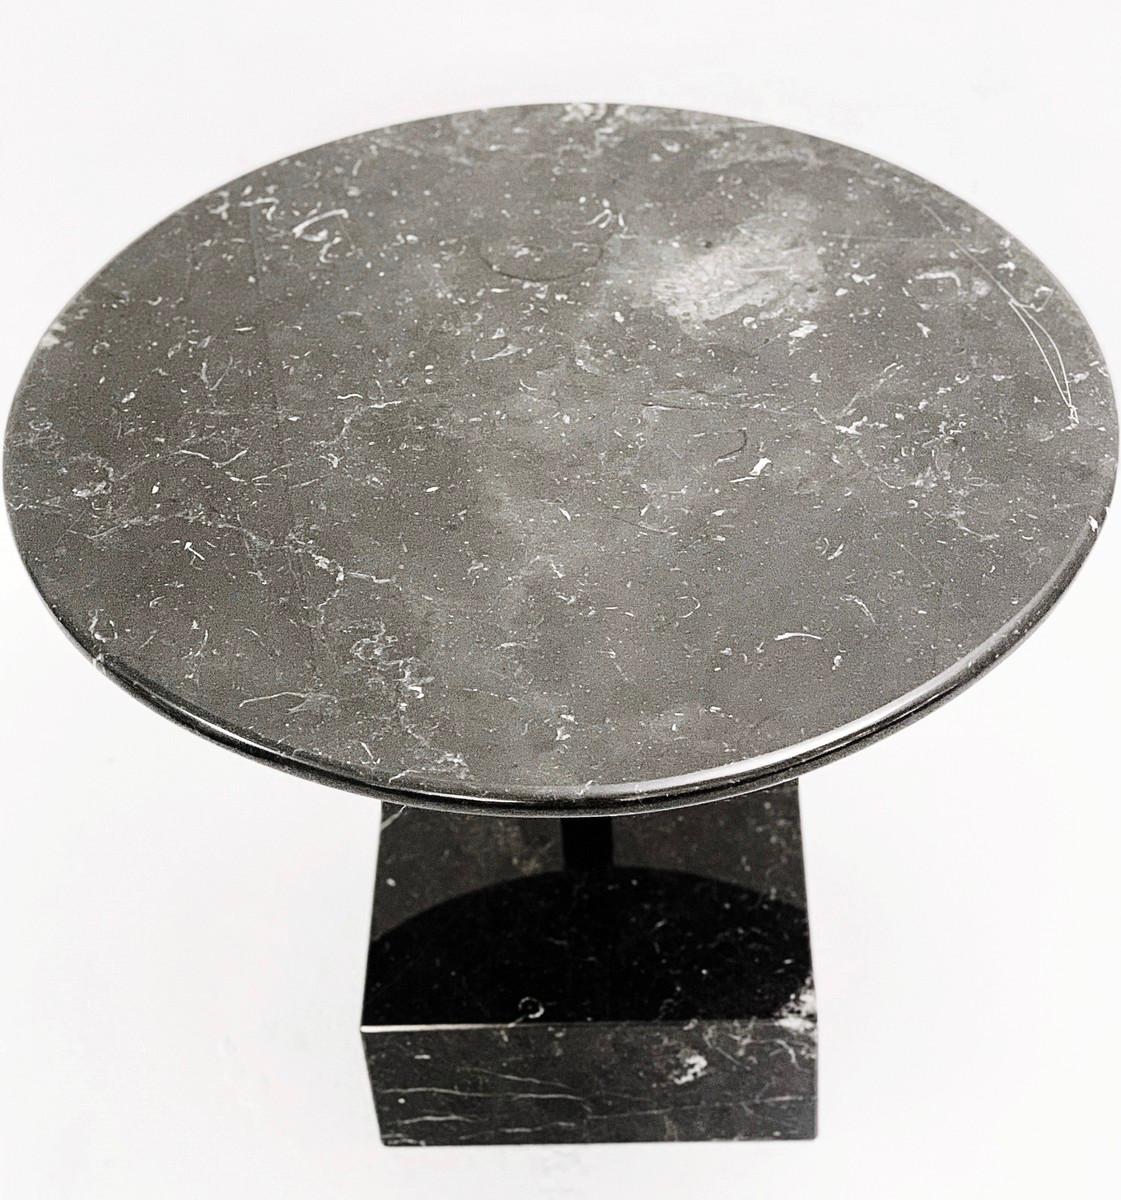 Black Marble Side Table 'Primavera' by Ettore Sottsass for Ultima Edizione In Good Condition For Sale In Brussels, BE